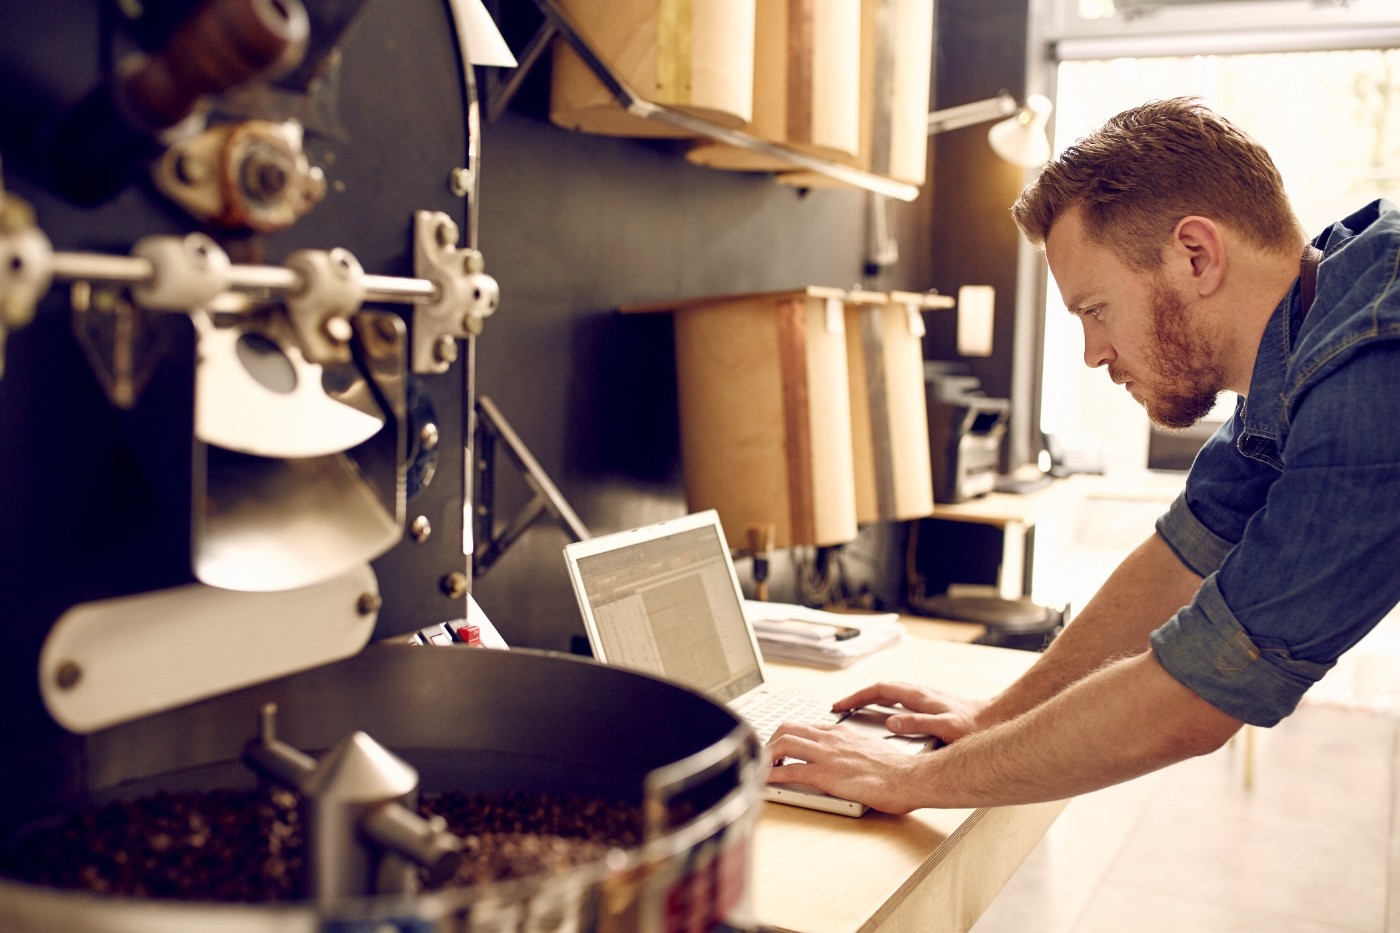 Man who owns small coffee business uses laptop to work on digital marketing